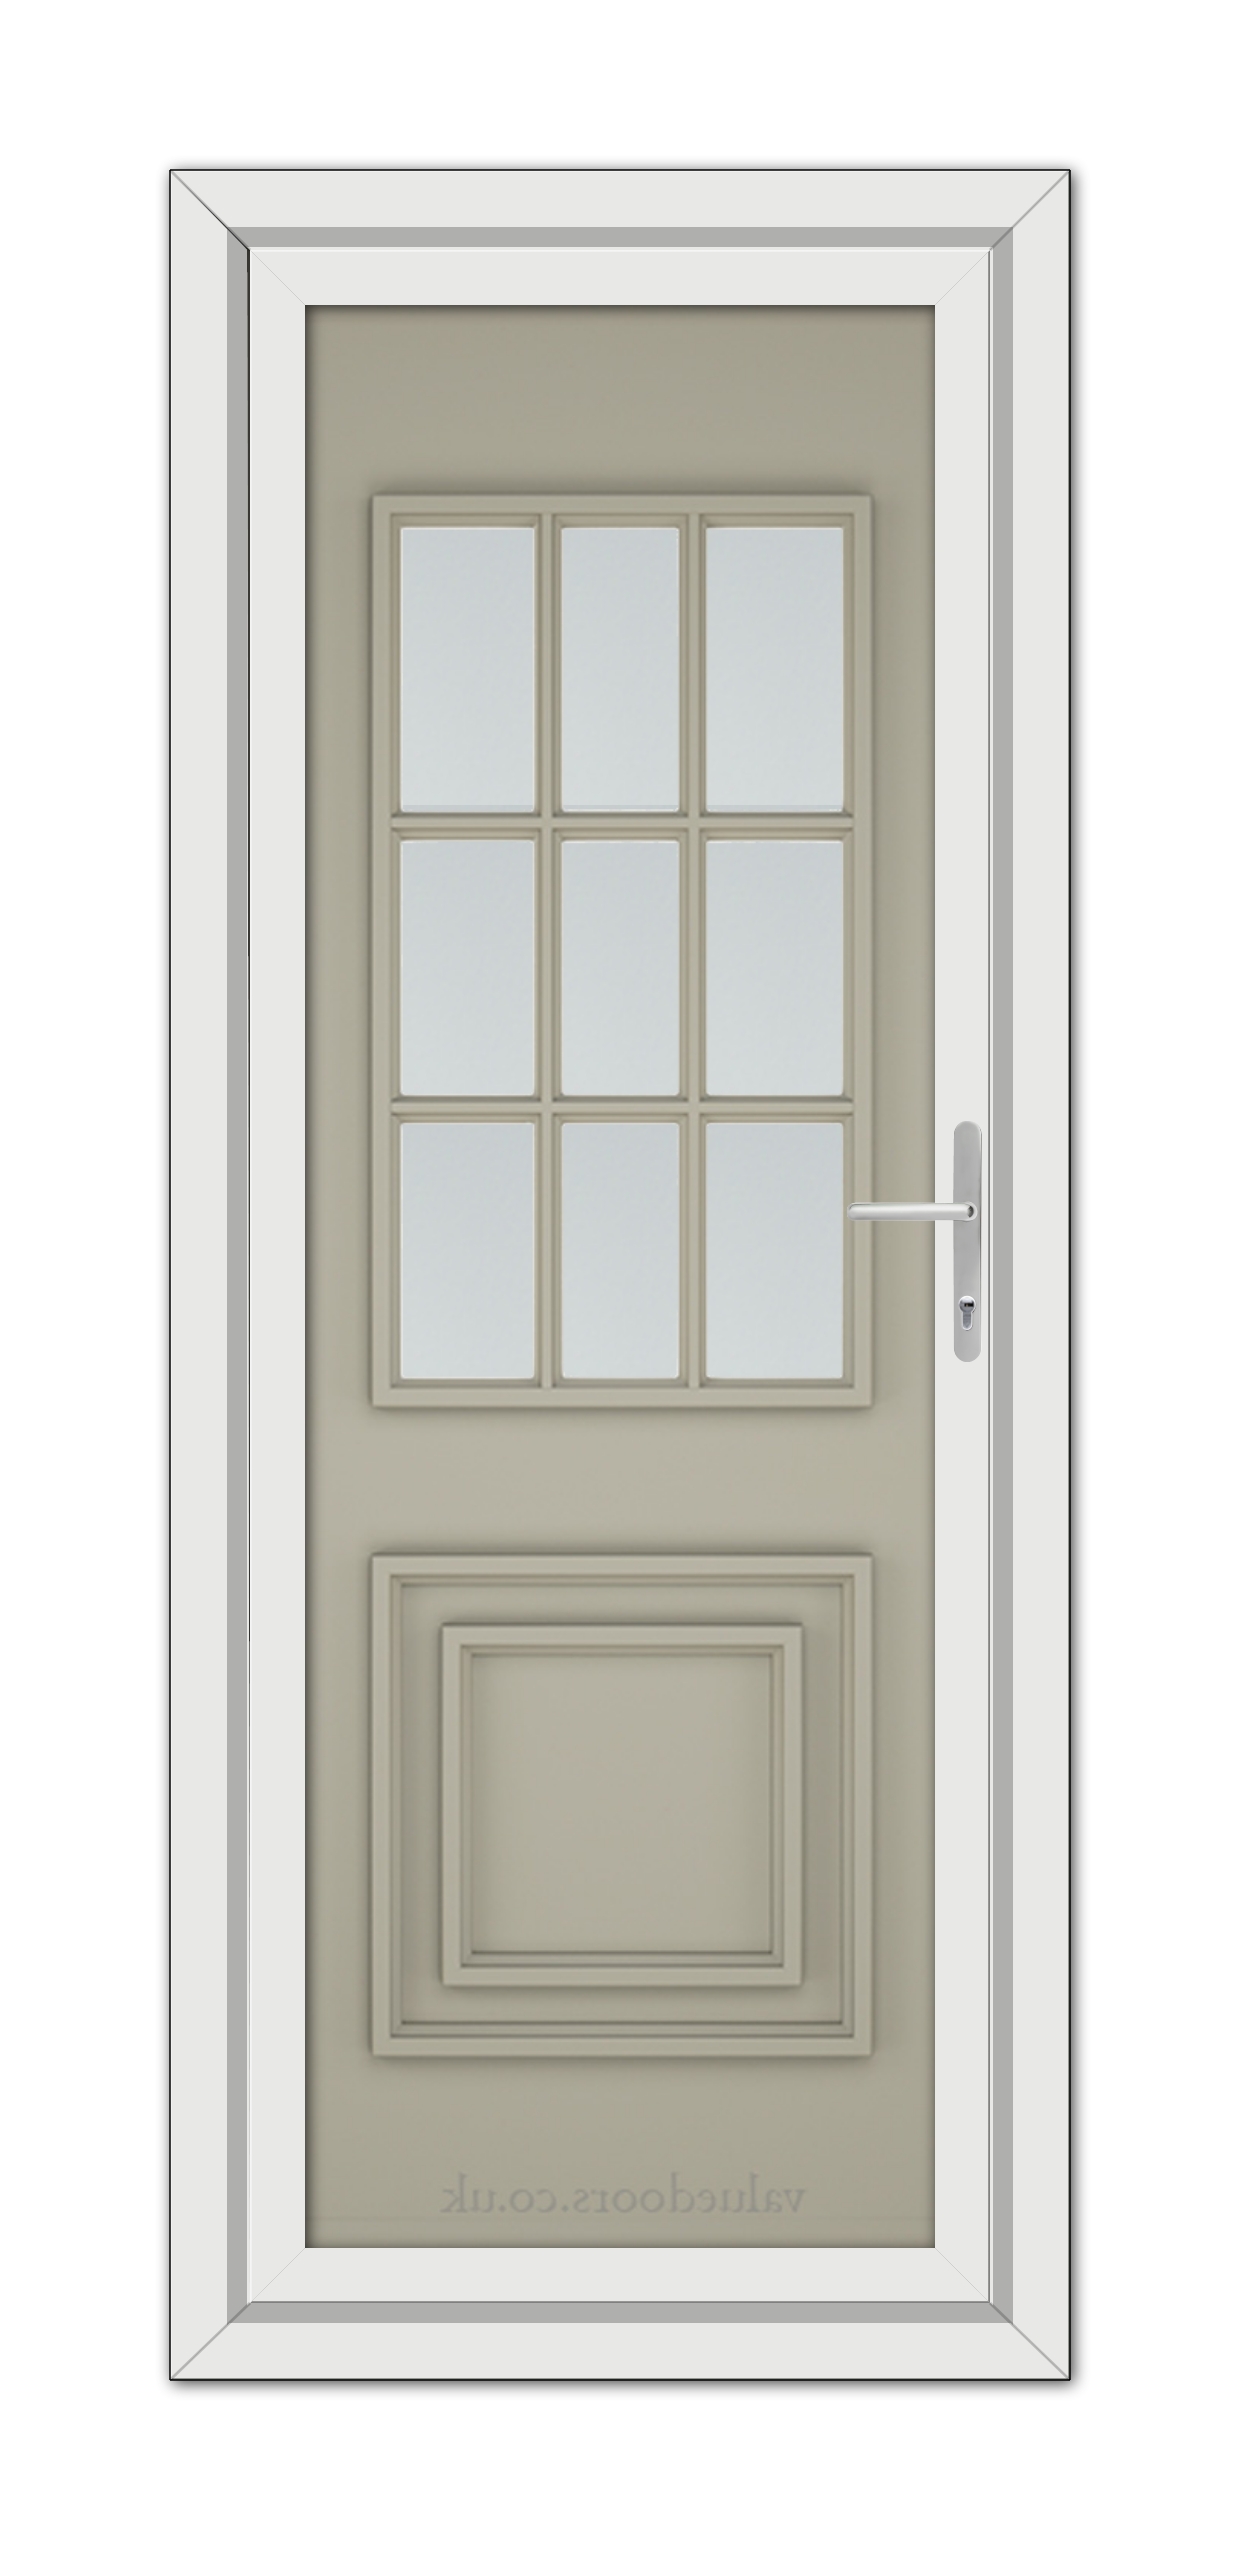 A vertical image of a closed, Pebble Grey Cambridge One uPVC Door featuring a window with nine panes and a metallic handle, set within a white frame.